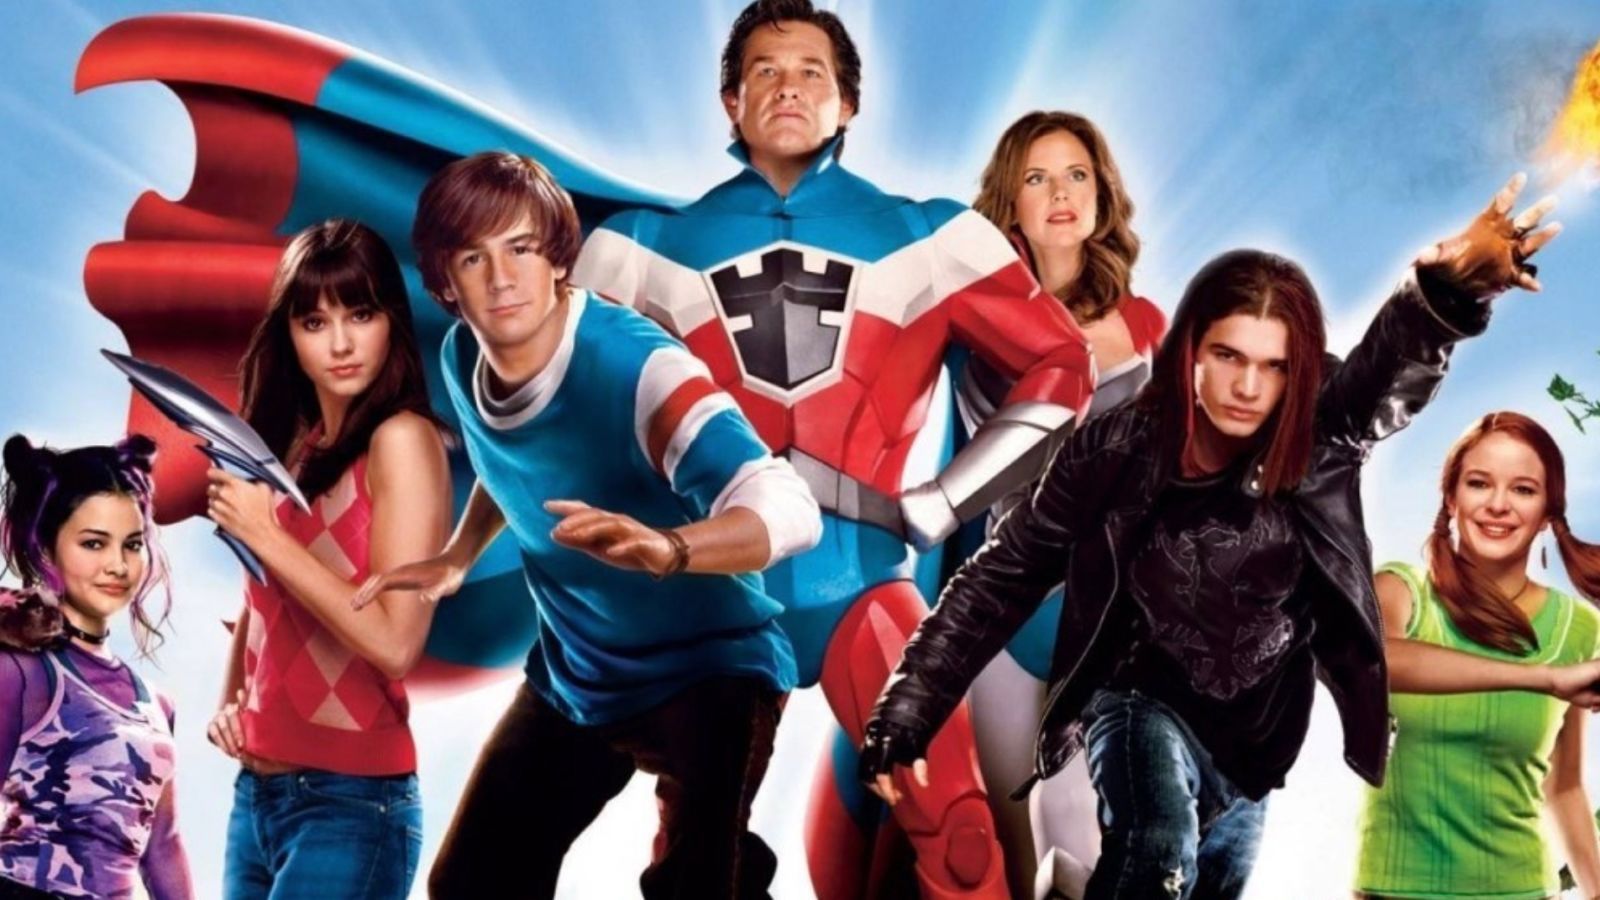 Sky High sequel would have been called « Save U » (U for University)